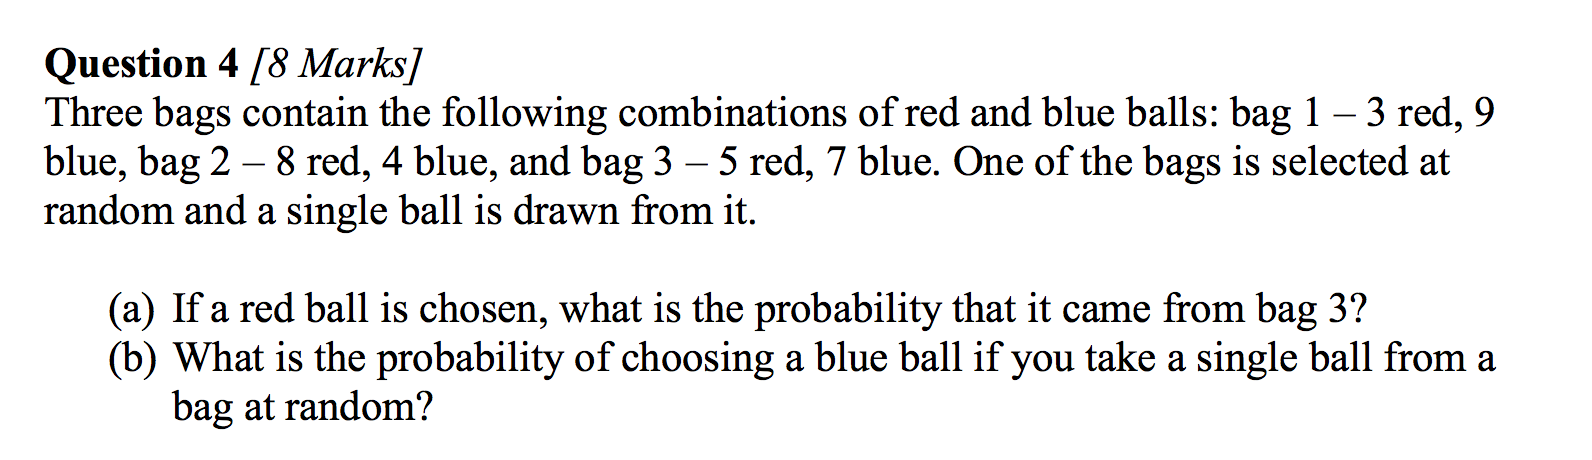 How Do You Know If You Have Blue Balls